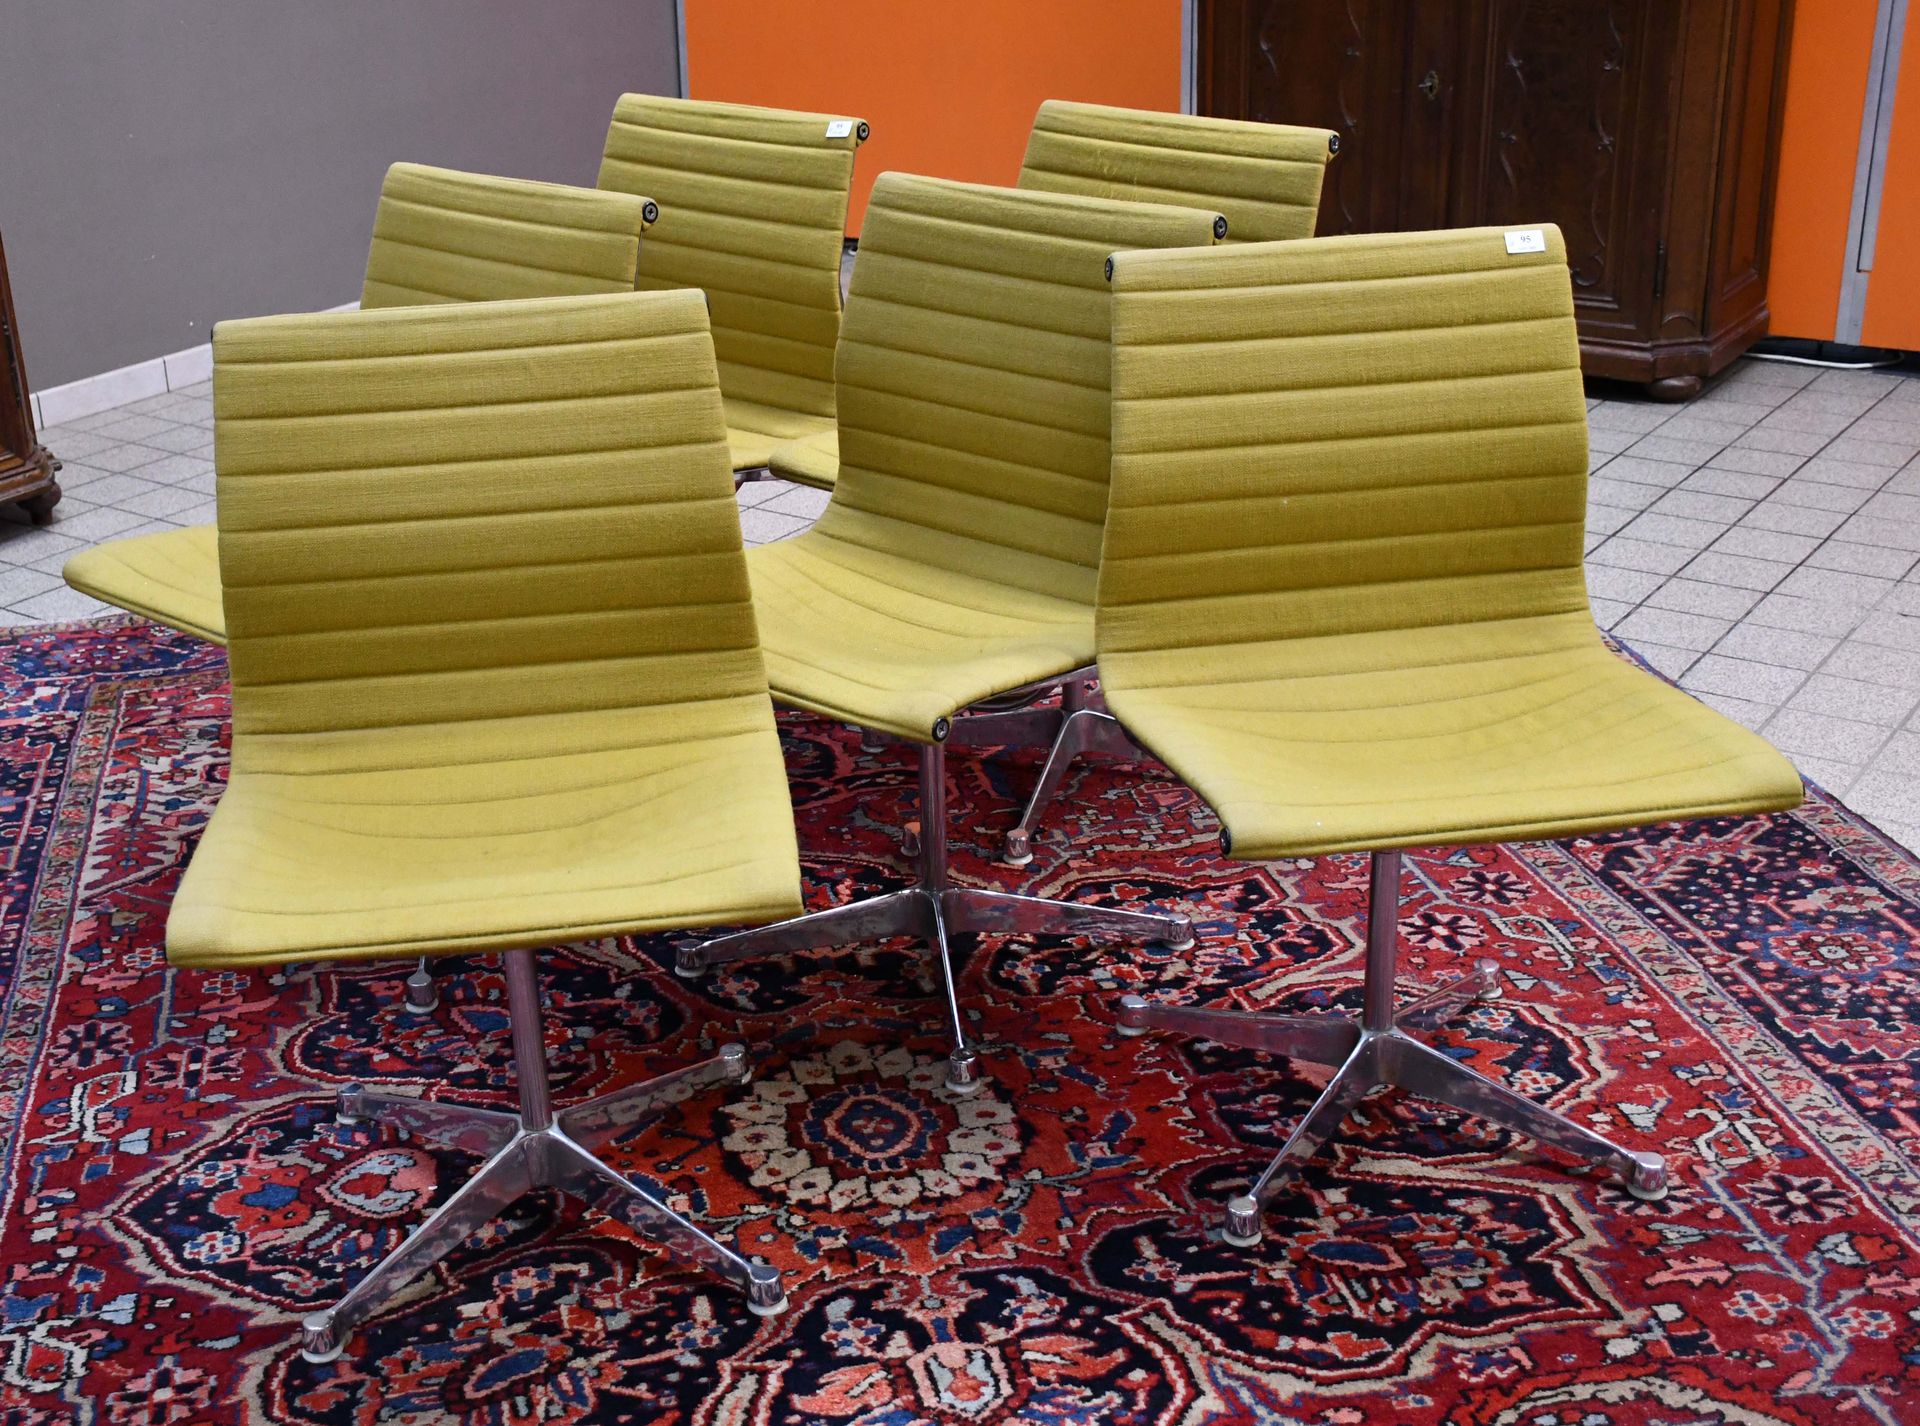 Null Herman Miller / Charles Eames

Series of six chromed and fabric chairs.